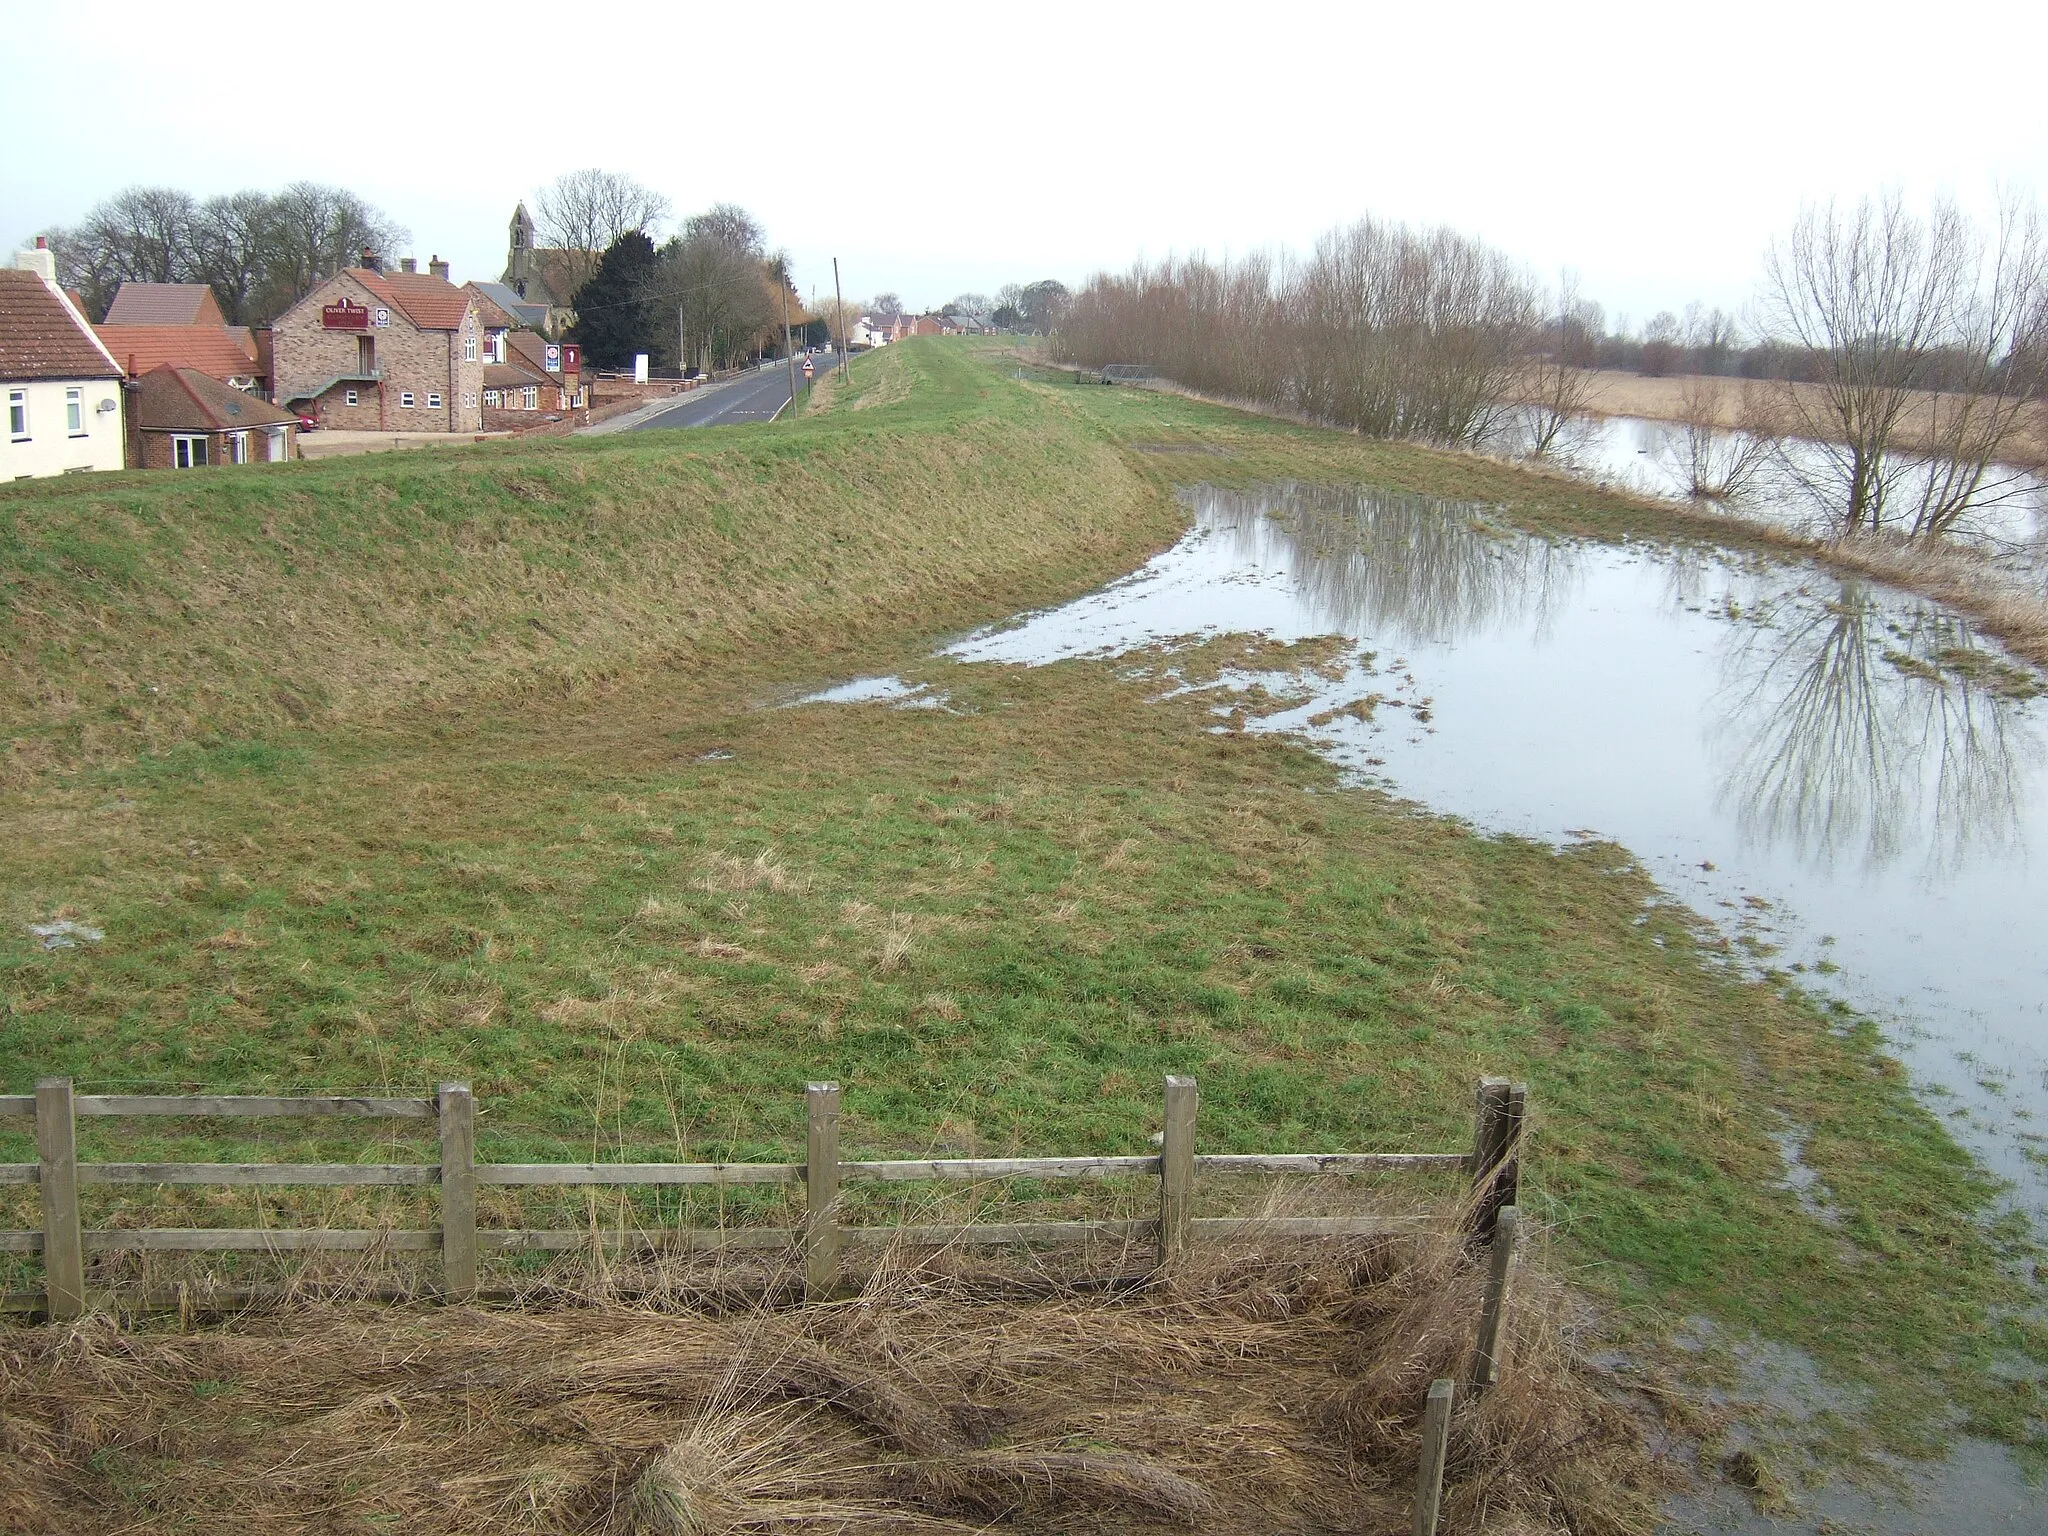 Photo showing: Guyhirn and The Nene With The Main Road running right next to the bank of The River Nene the village has evolved into a "one sided" village.
http://www.guyhirn-online.org.uk/history.shtml